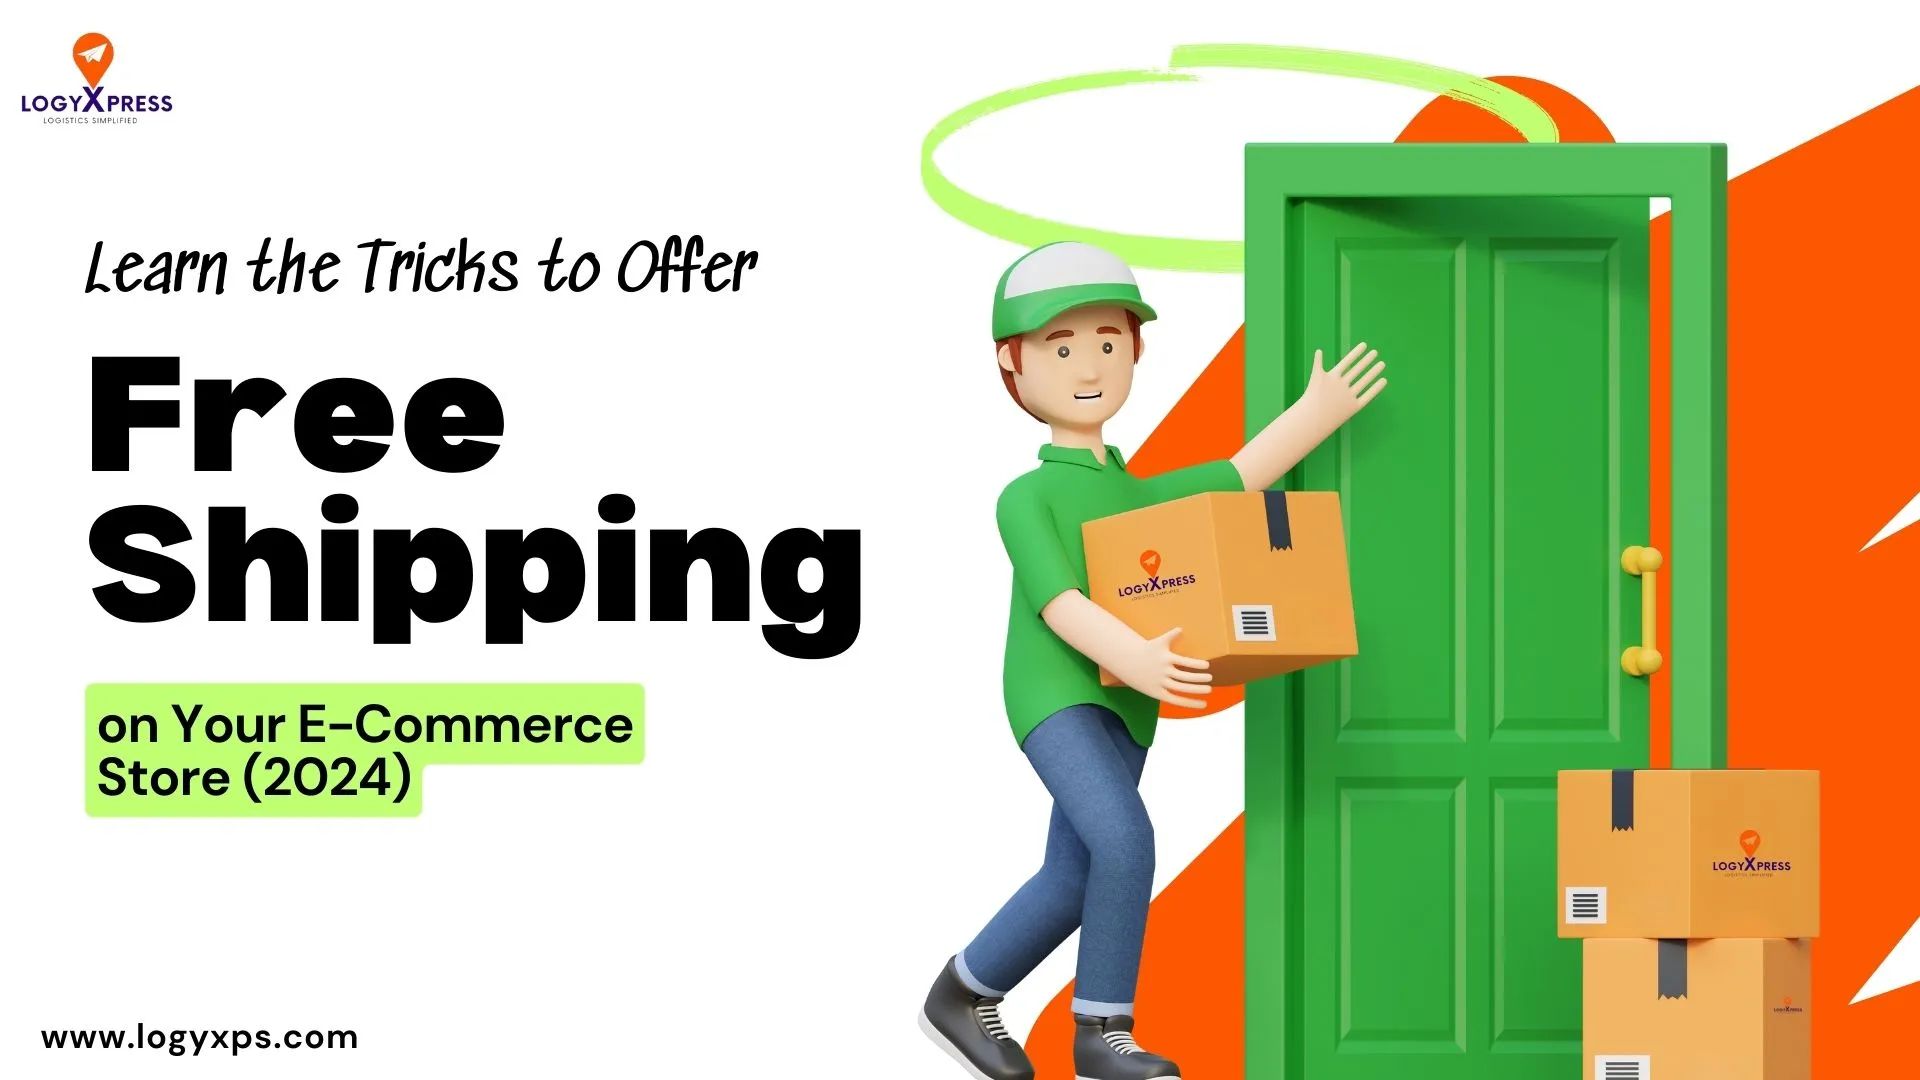 Learn the Tricks to Offer Free Shipping on Your E-Commerce Store (2024)